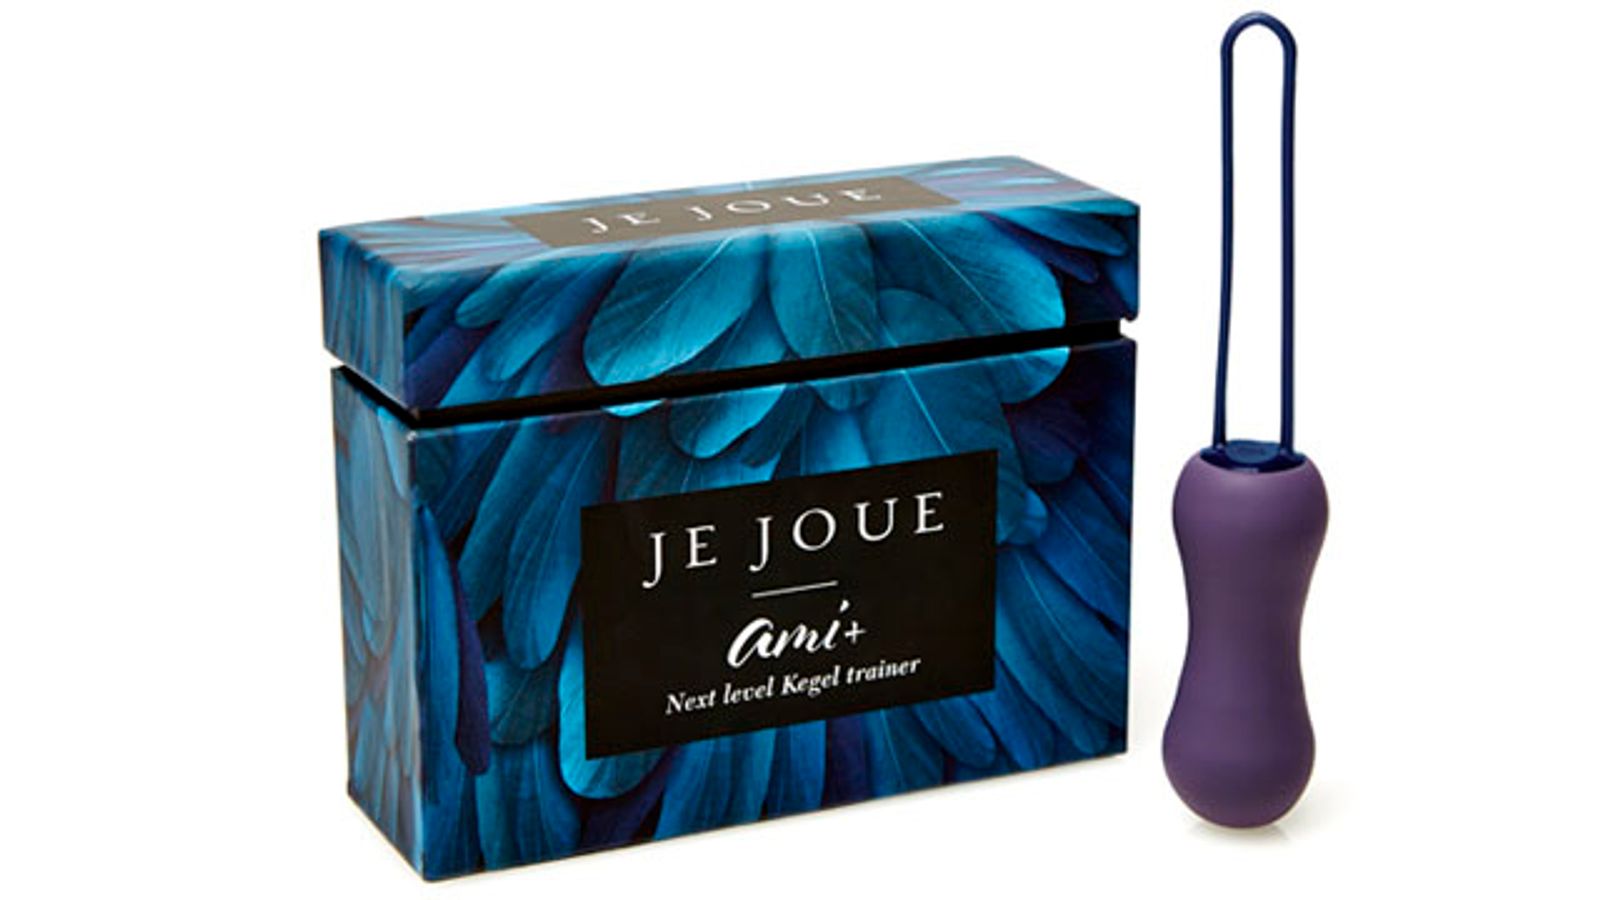 Entrenue Introduces Ami+ Advanced Kegel Weight from Je Joue